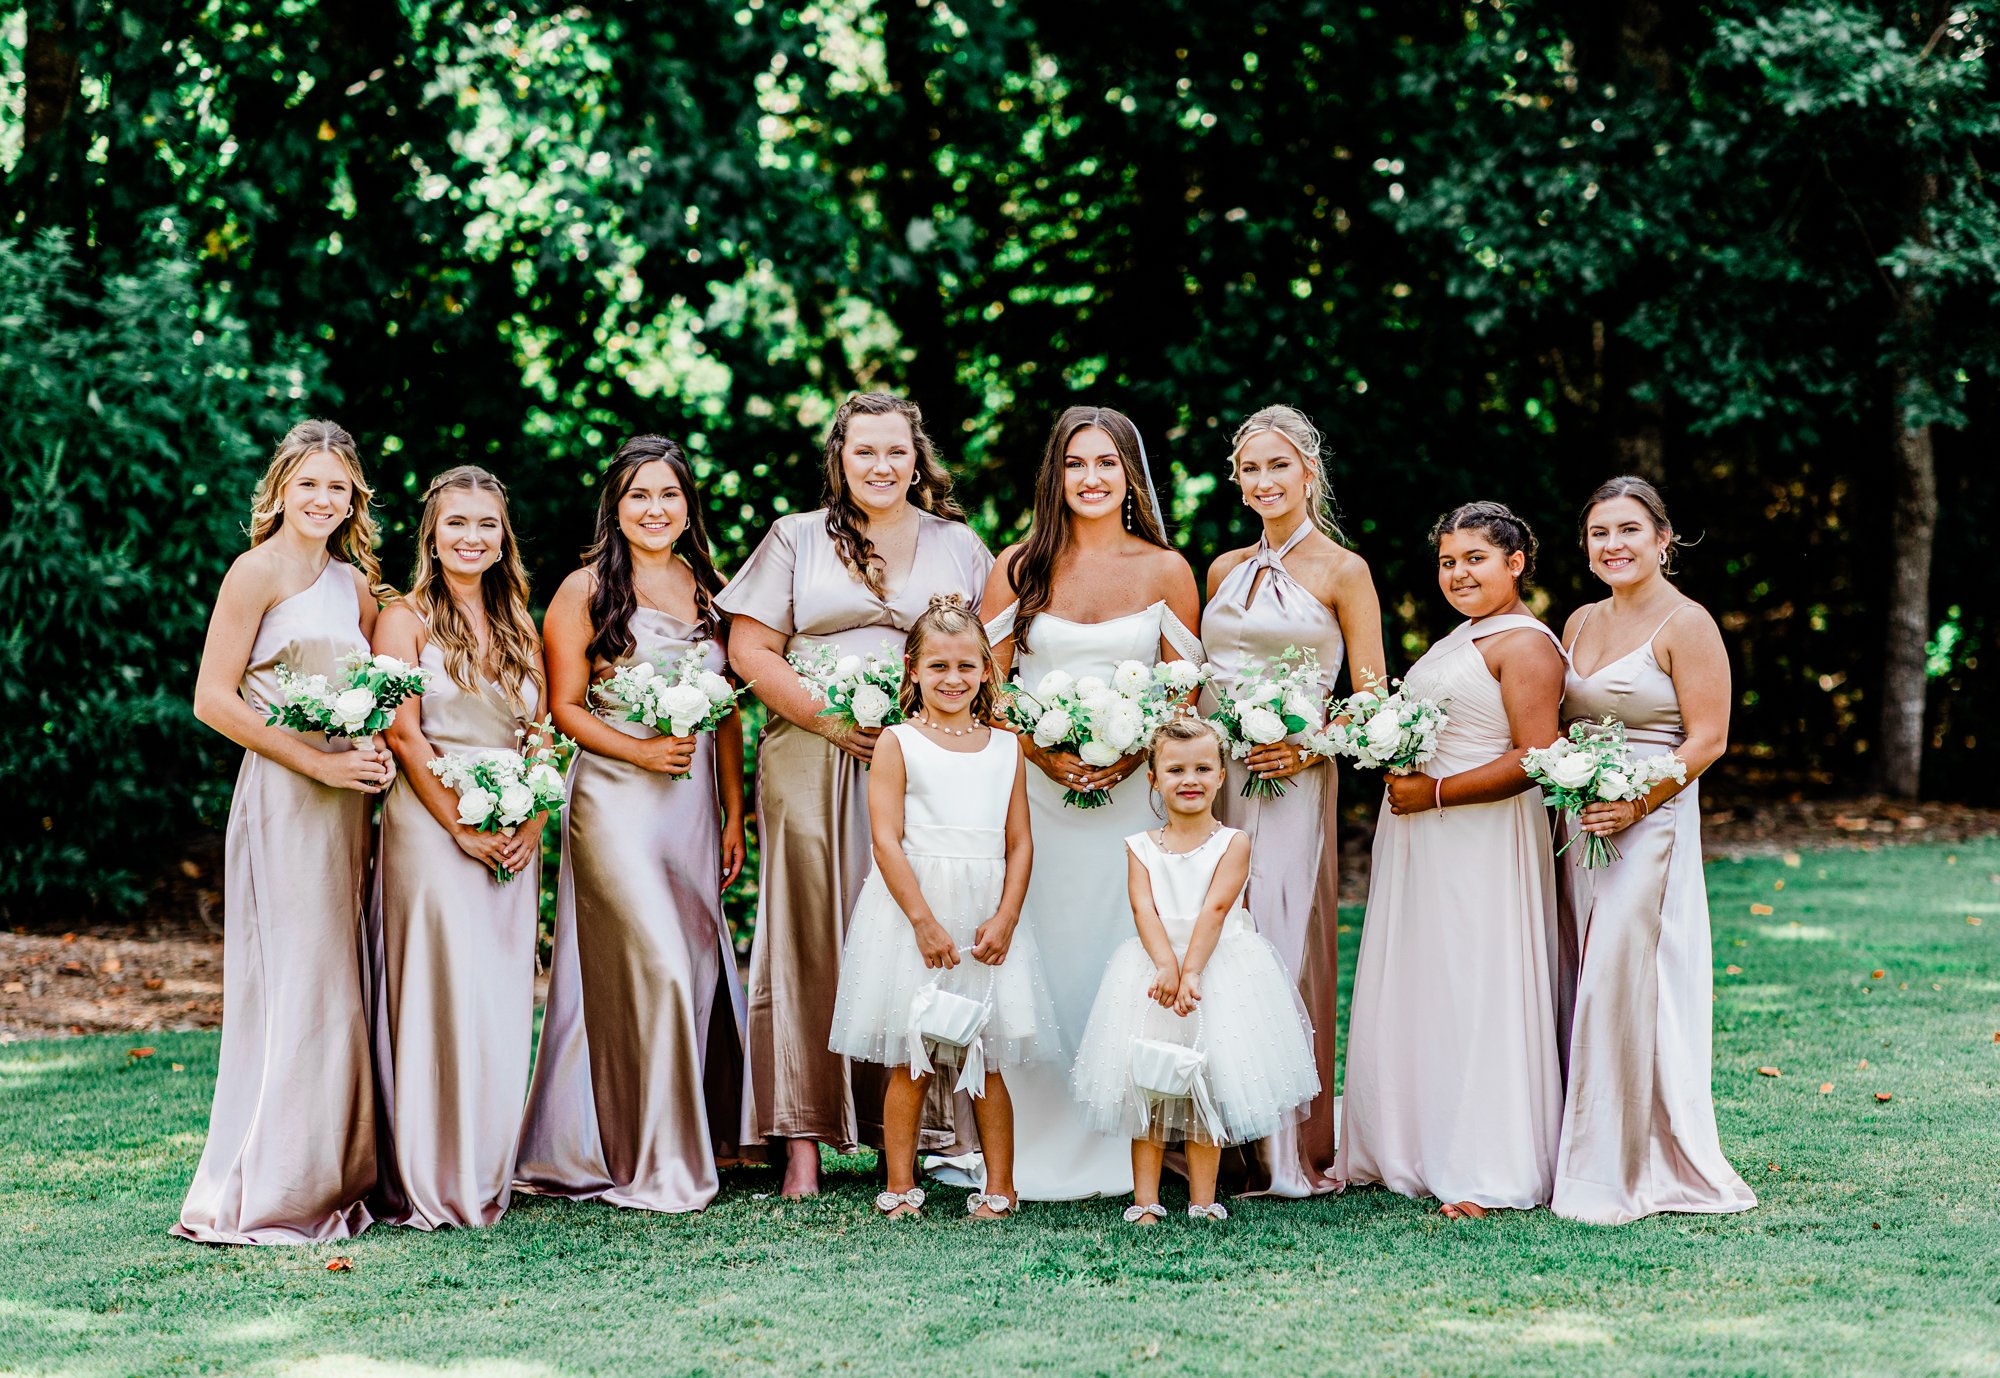 Greenville Sc Weding Day Timeline - photos with bridesmaids-1.jpg